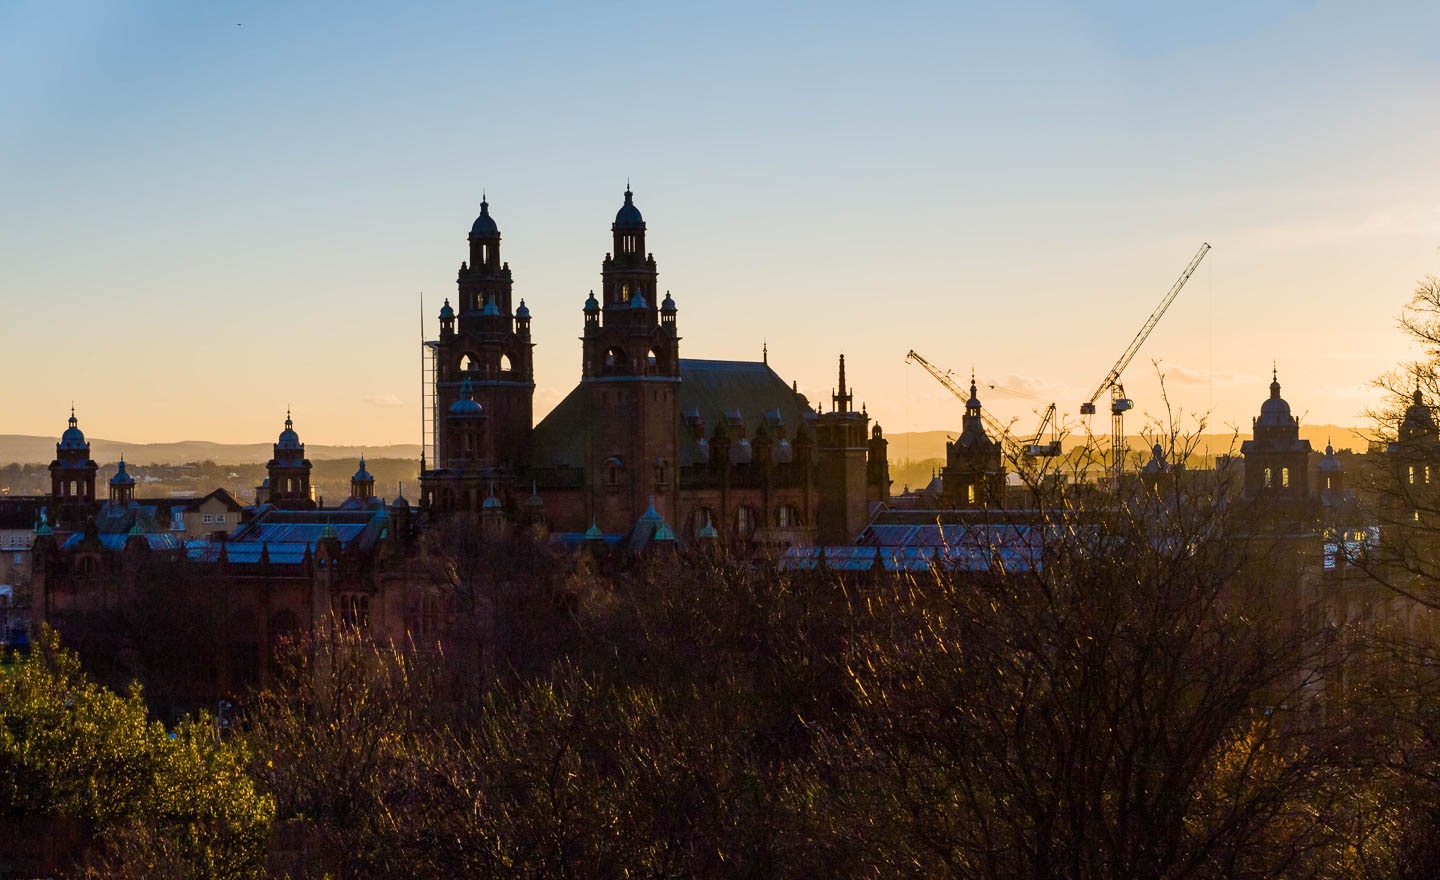 KELVINGROVE SUNSET
Late afternoon light can be fantastic to behold in autumn in Glasgow, and here the domes of Kelvingrove Gallery and the Kelvin Hall jostle with the silhouettes of cranes in the gloaming